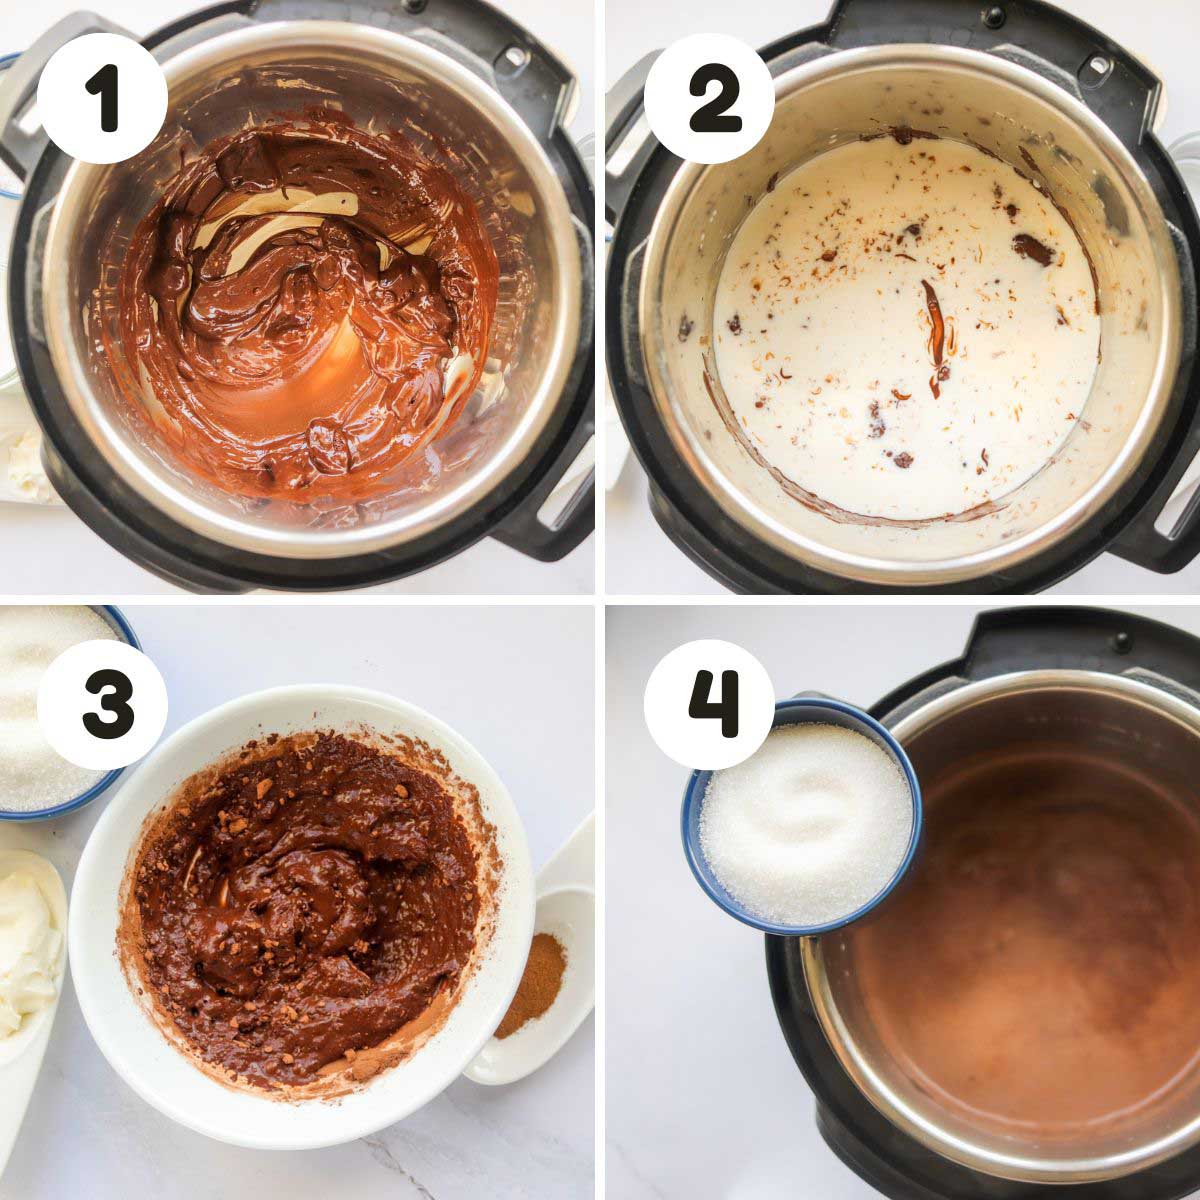 Steps to make the hot chocolate.